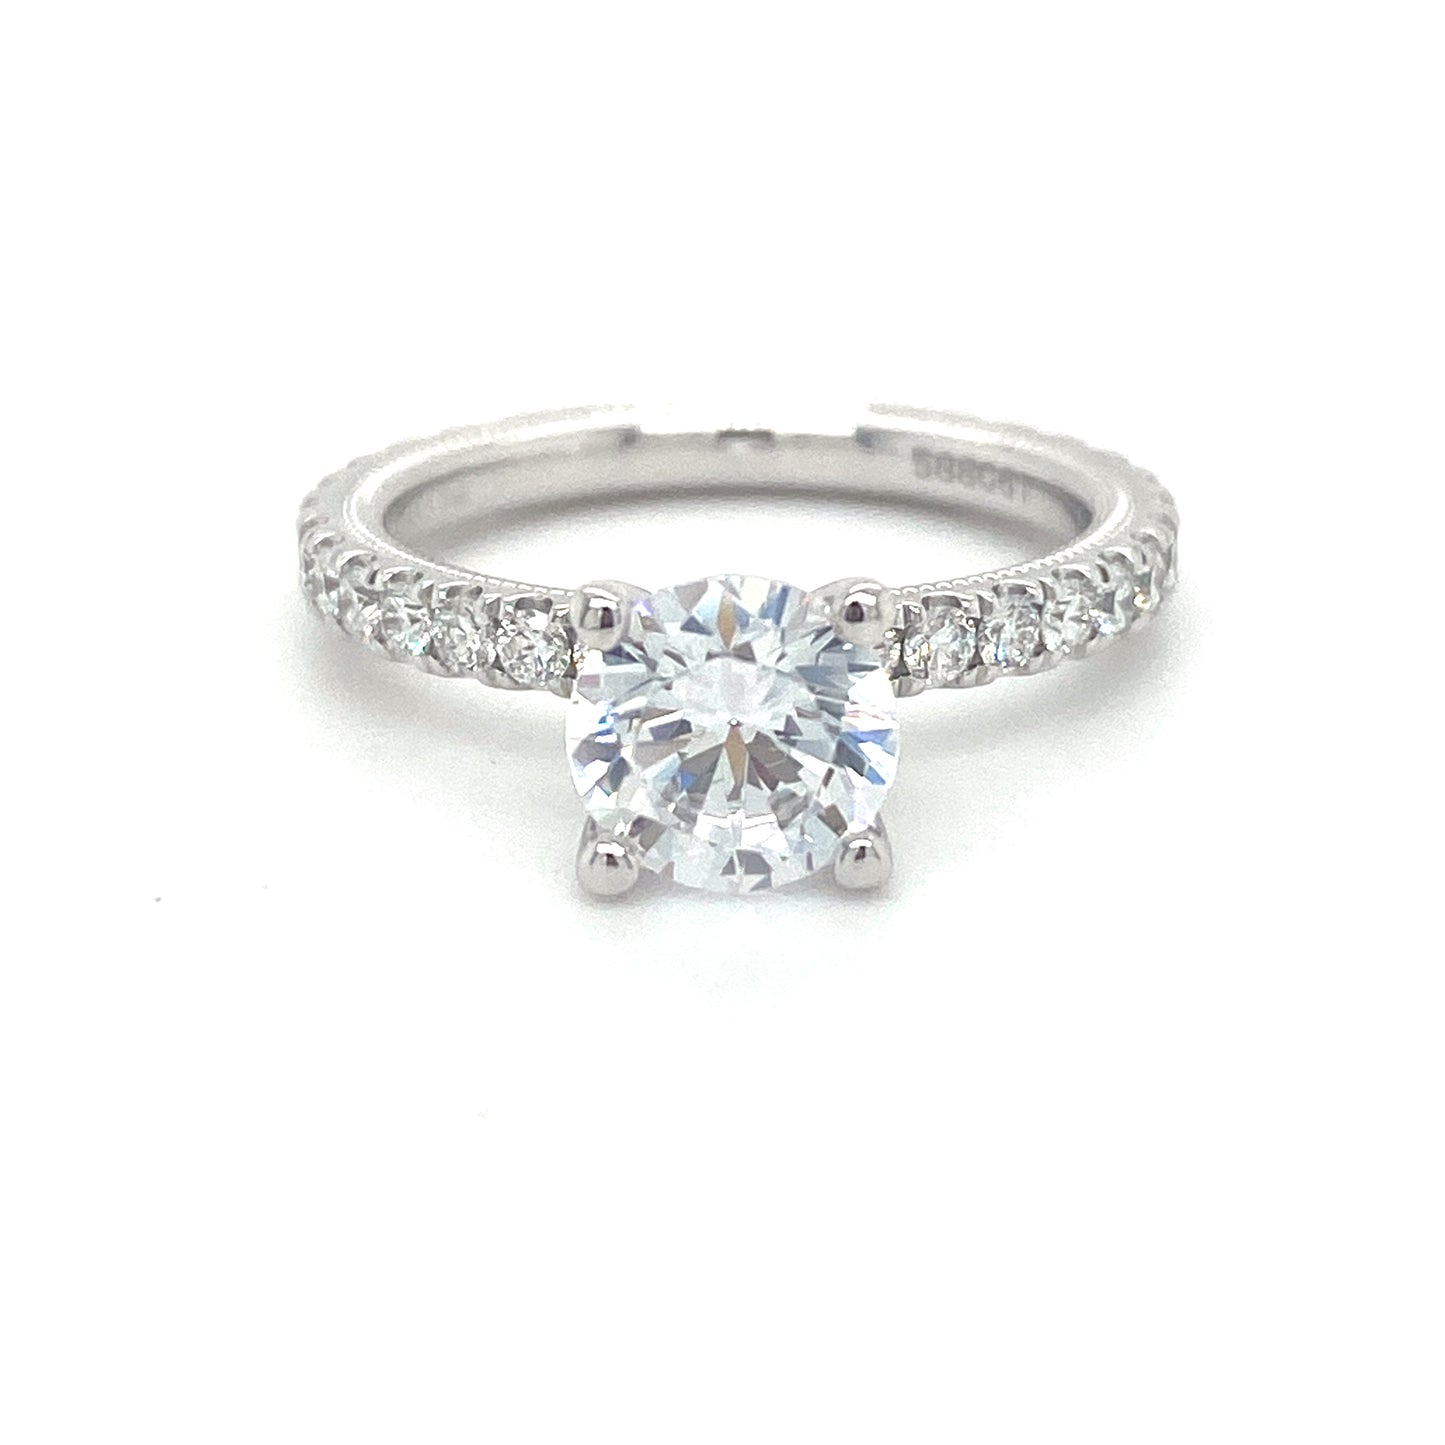 Verragio Tradition Collection White Gold Straight Semi-Mount Engagement Ring